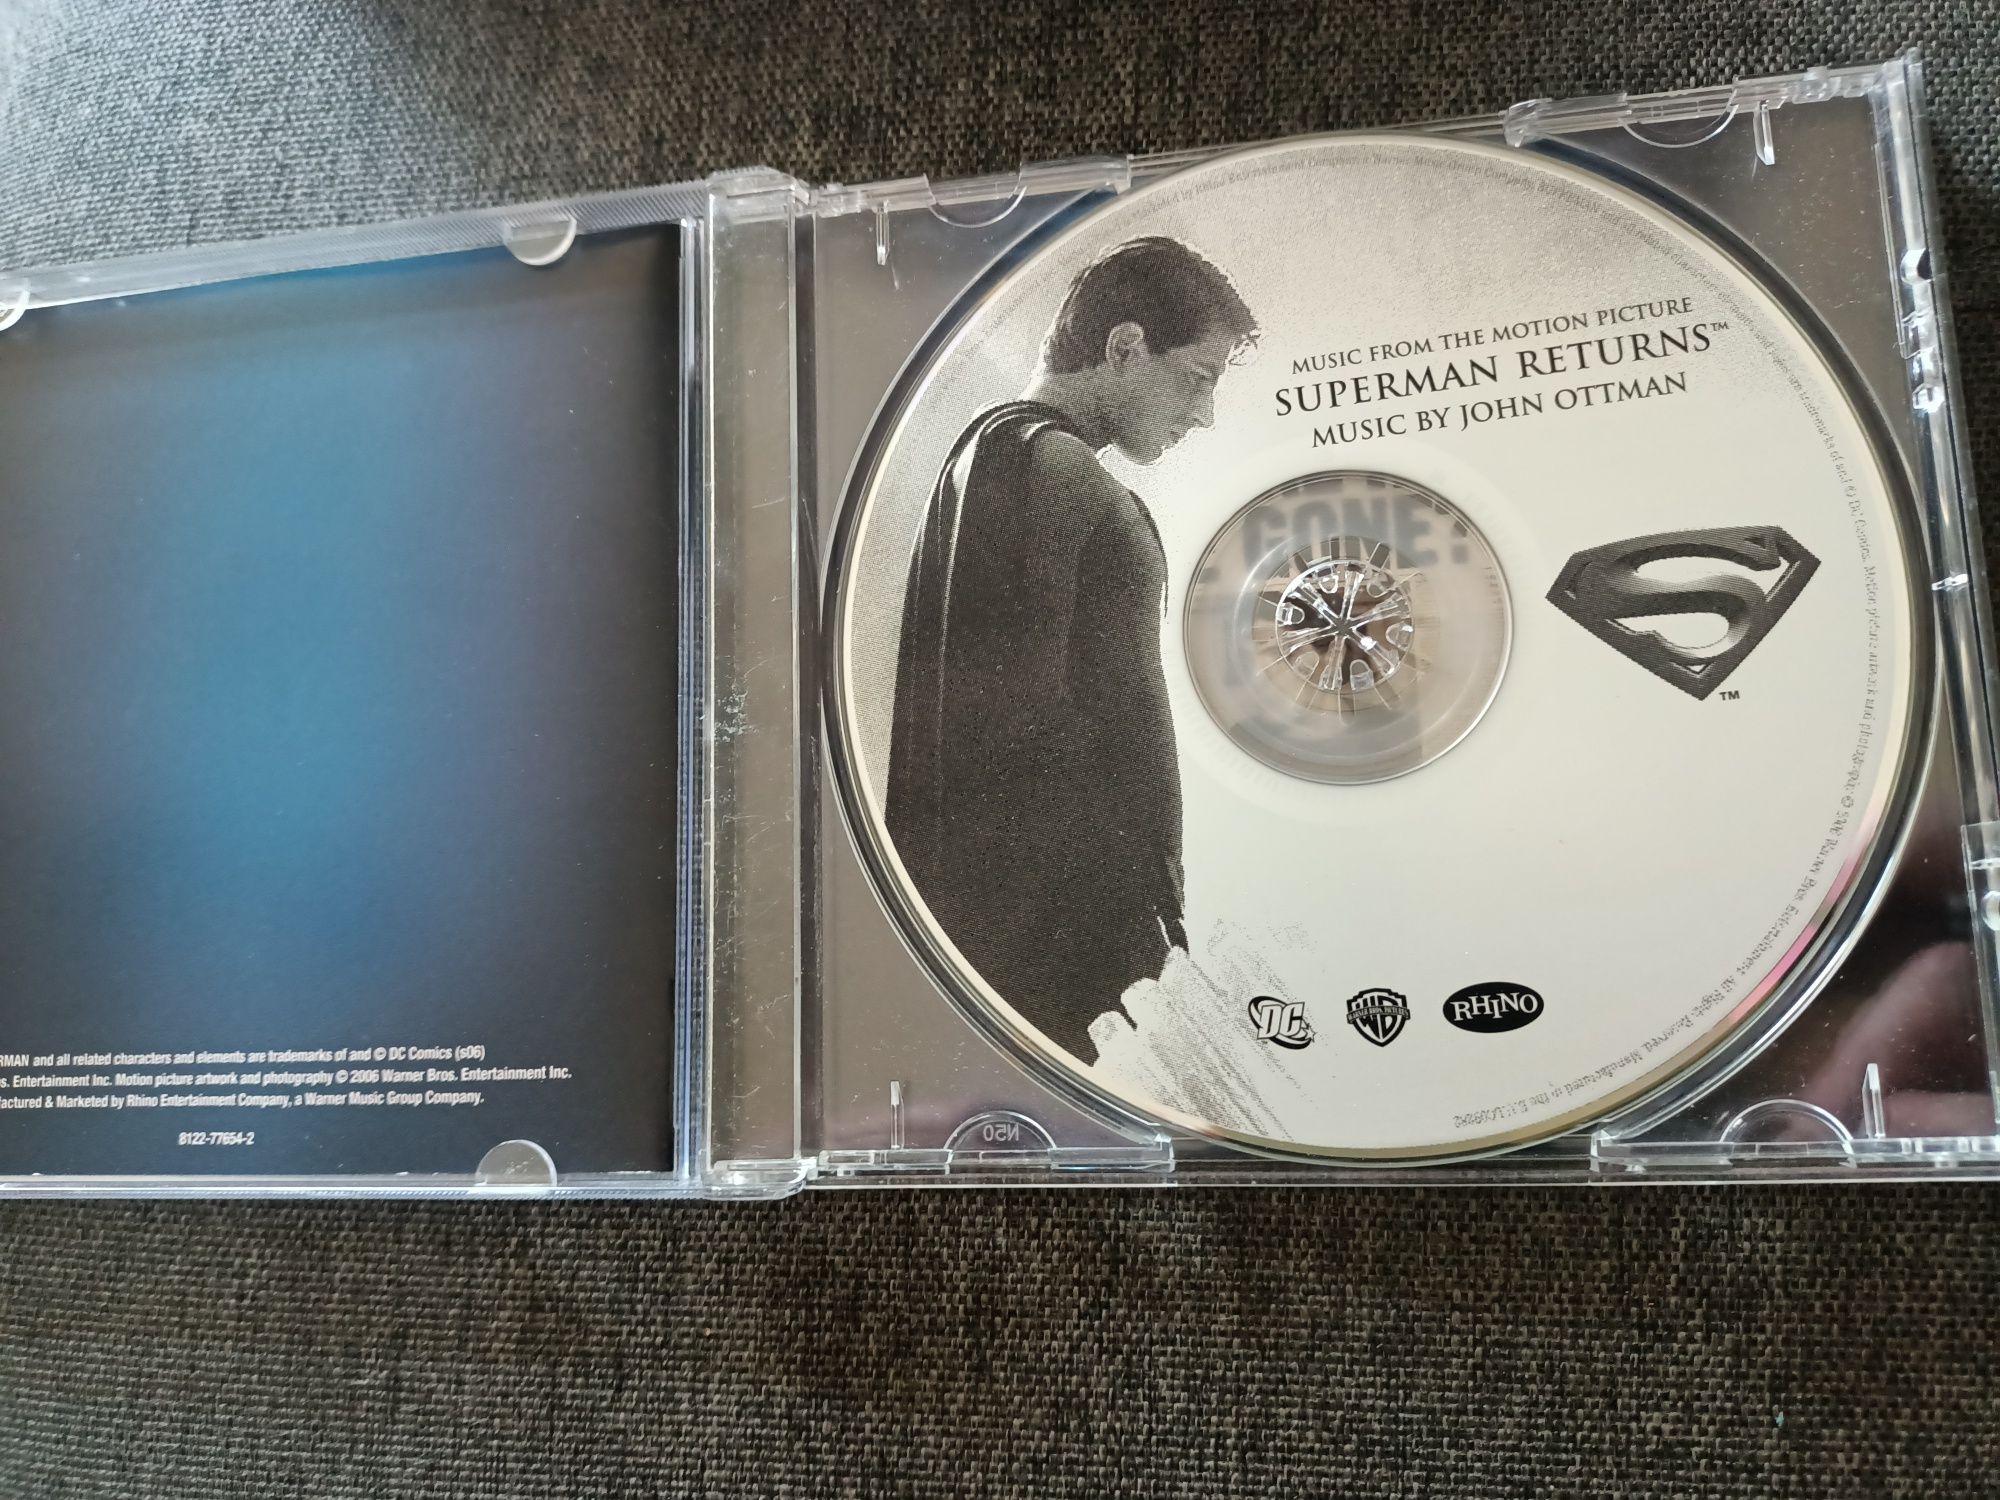 Superman Returns (Music From The Motion Picture) (CD, Album, Enh)(nm)